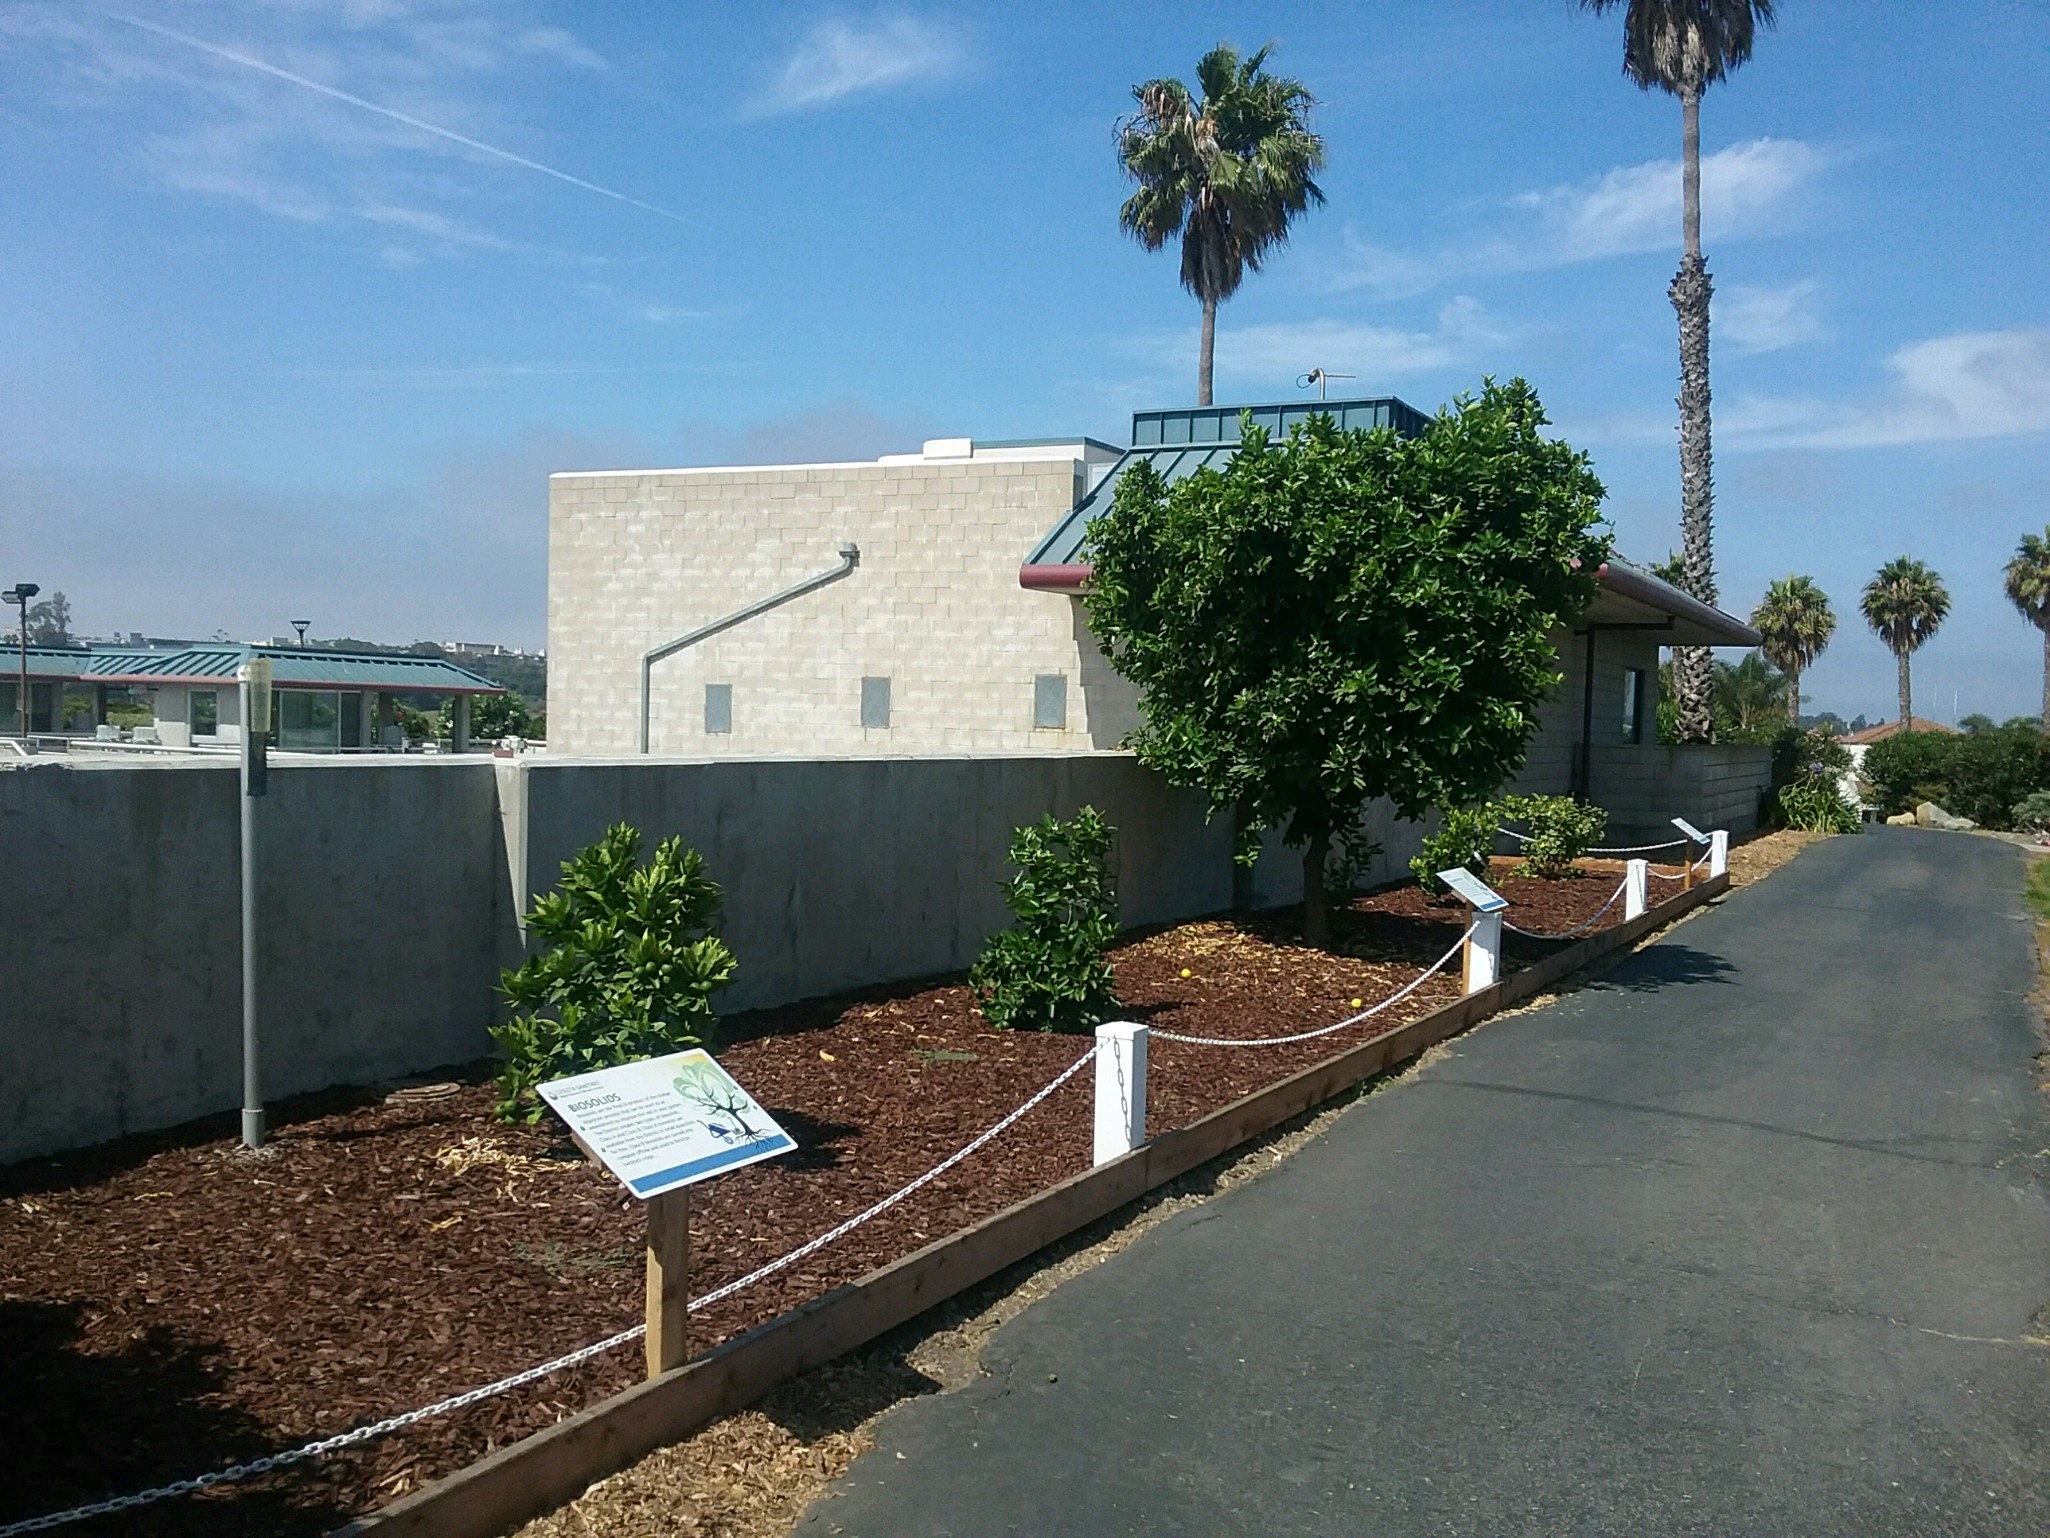 Goleta Sanitary District Demonstration Garden for Resource Recovery